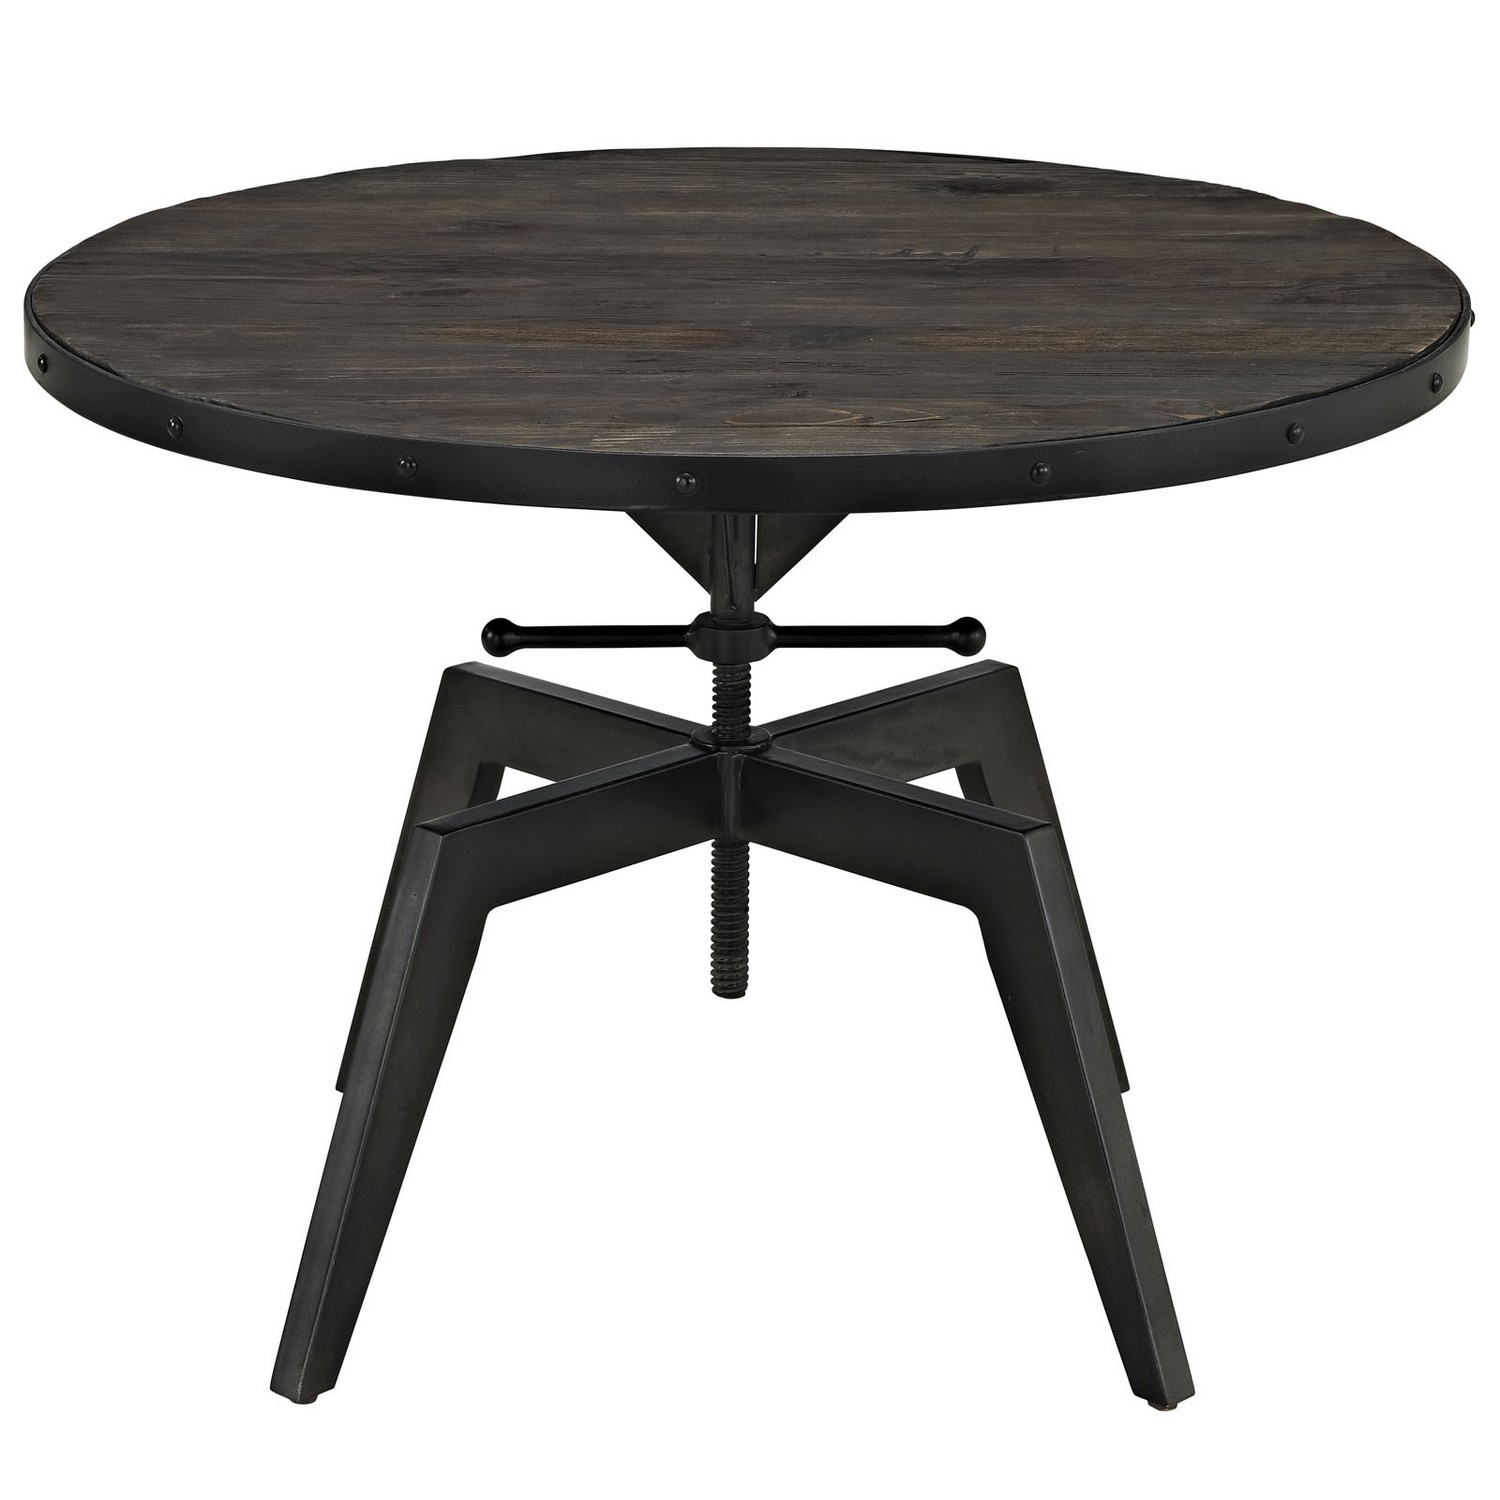 Modway Grasp Wood Top Coffee Table - Black.